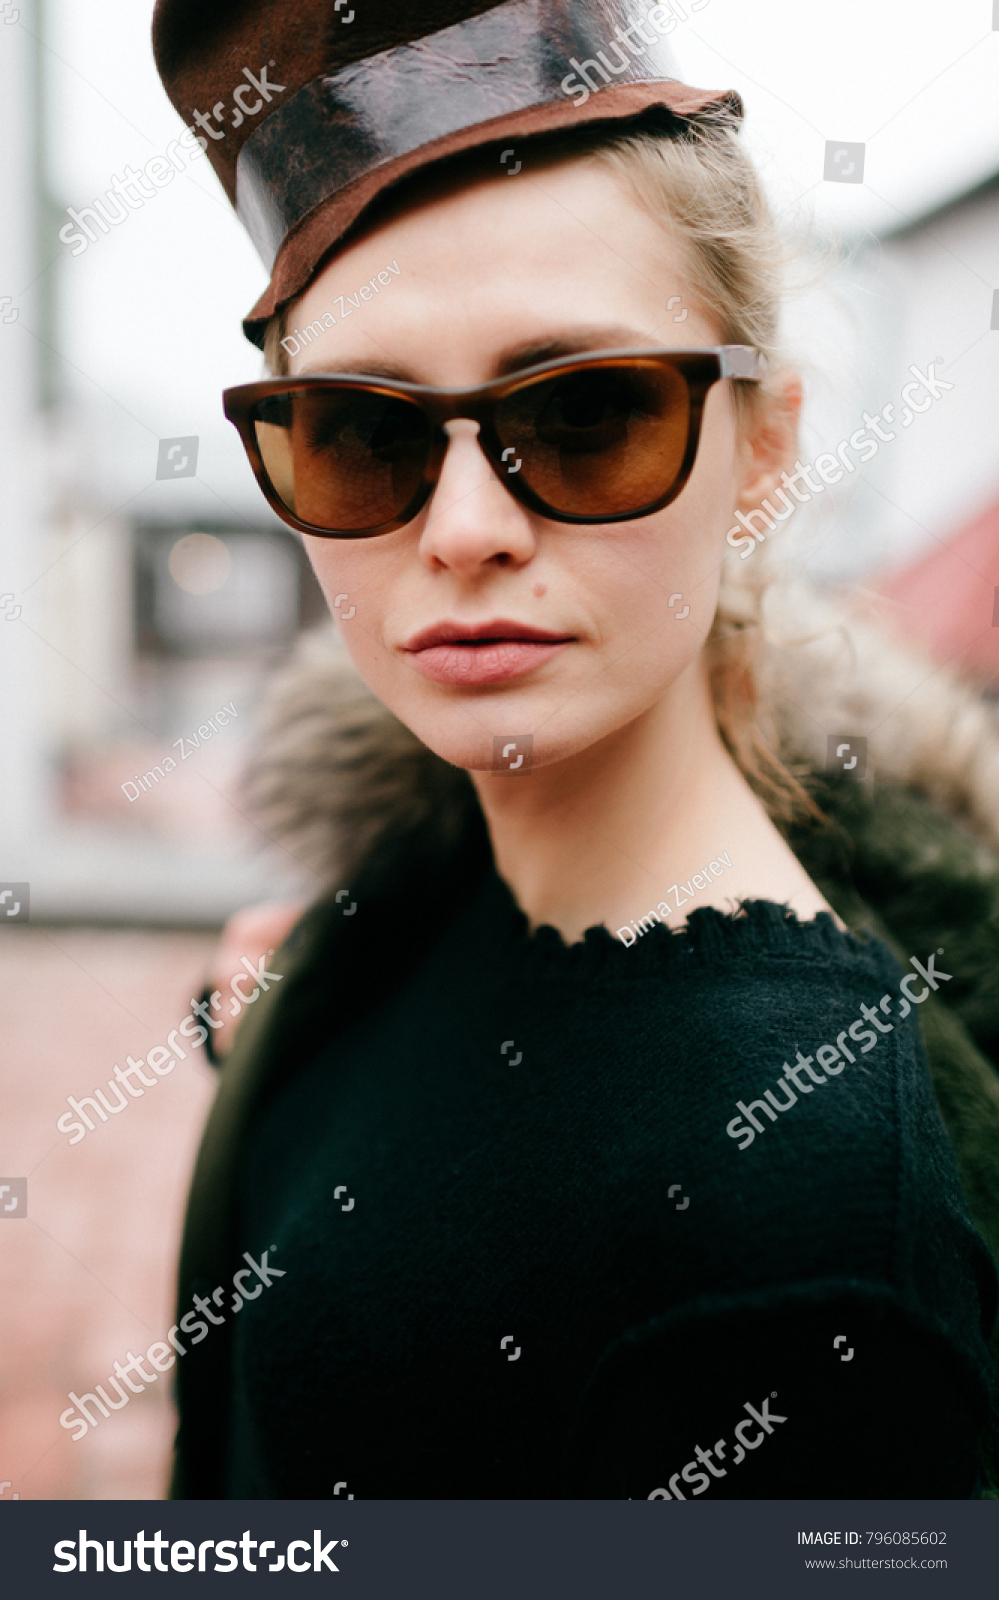 Closeup portrait of odd bizarre kinky beautiful cute young famous celebrity fashion caucasian blonde model woman in rich modern trendy sunglasses. Lovely girl posing for camera in stylish clothing #796085602